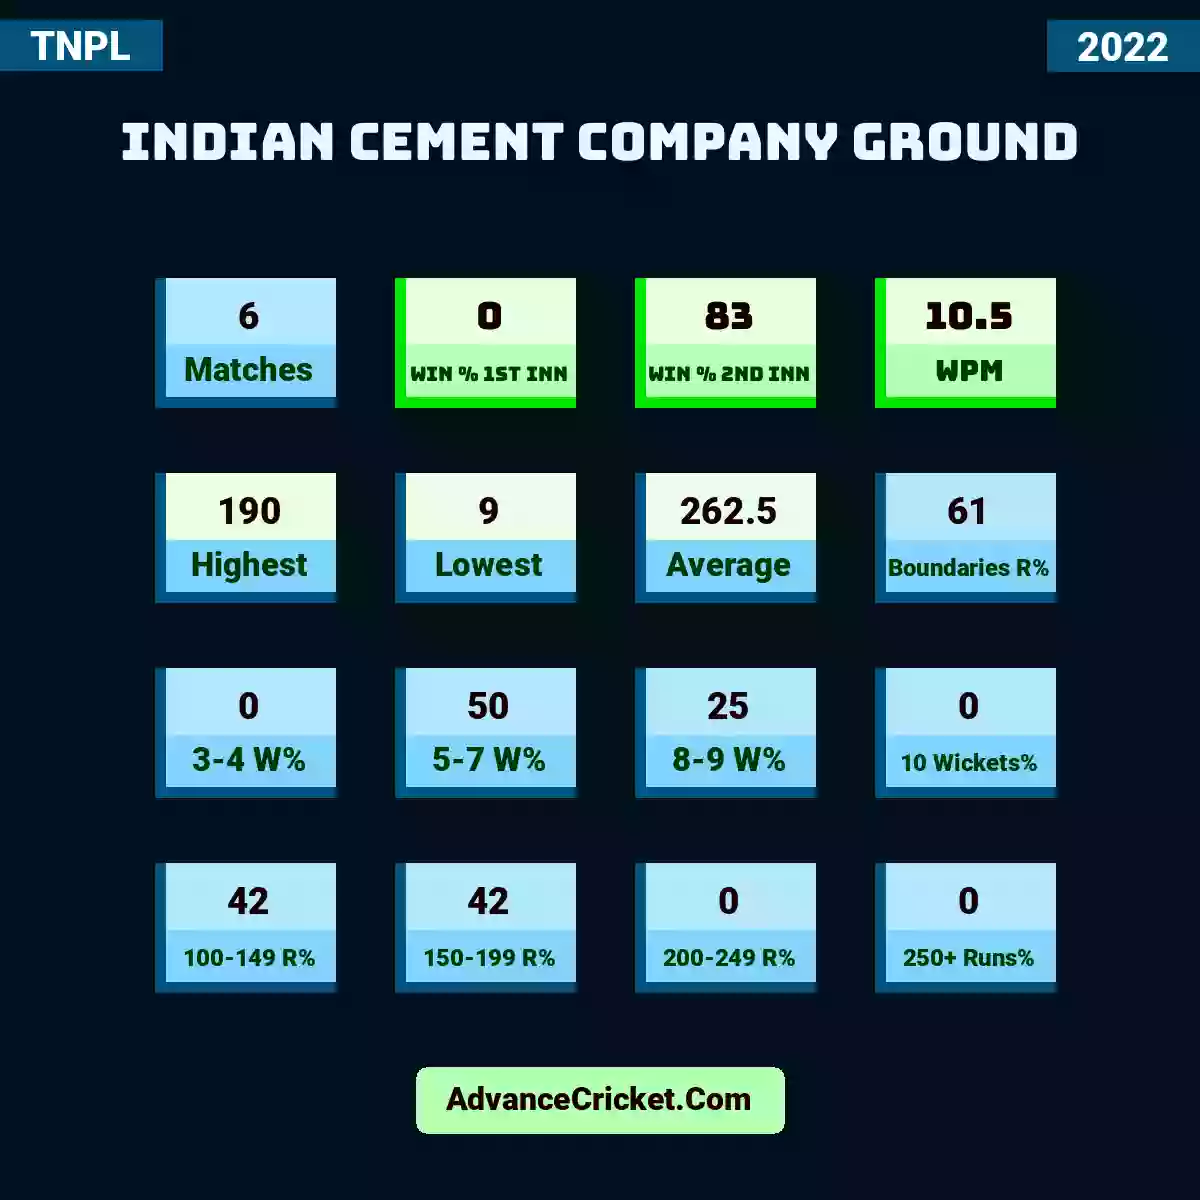 Image showing Indian Cement Company Ground with Matches: 6, Win % 1st Inn: 0, Win % 2nd Inn: 83, WPM: 10.5, Highest: 190, Lowest: 9, Average: 262.5, Boundaries R%: 61, 3-4 W%: 0, 5-7 W%: 50, 8-9 W%: 25, 10 Wickets%: 0, 100-149 R%: 42, 150-199 R%: 42, 200-249 R%: 0, 250+ Runs%: 0.